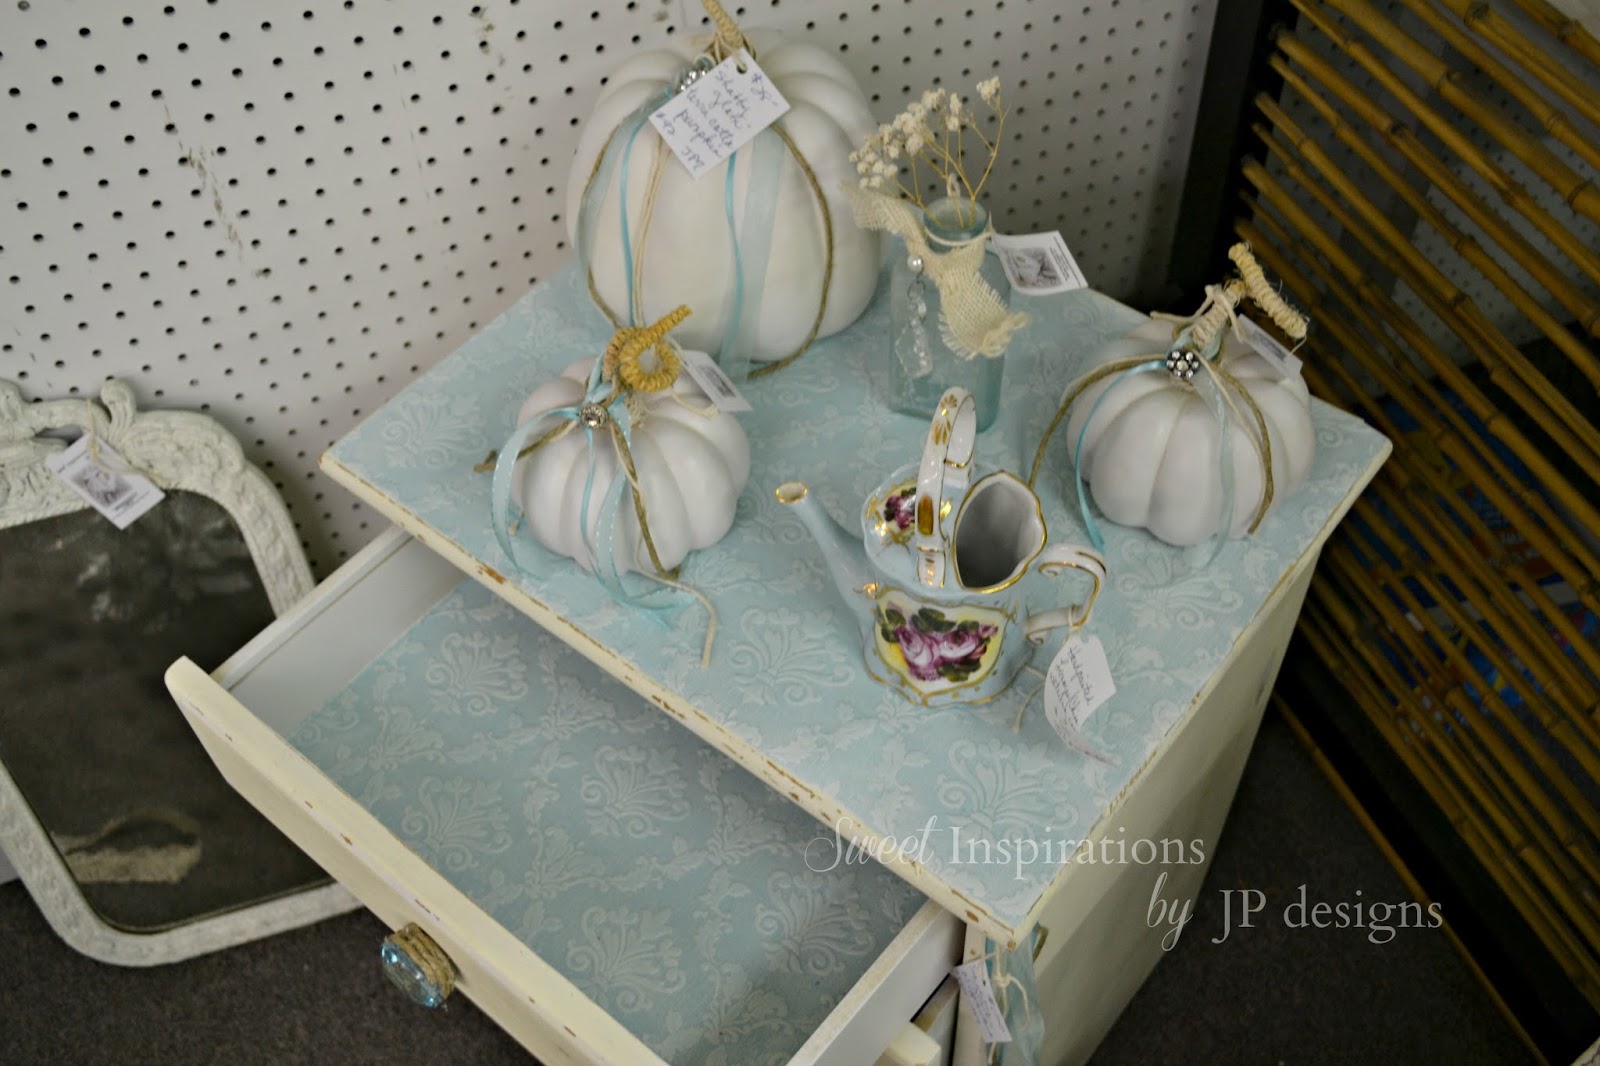 ... by JP designs: A Chippy Nightstand with a Paint Wash Wallpaper Twist